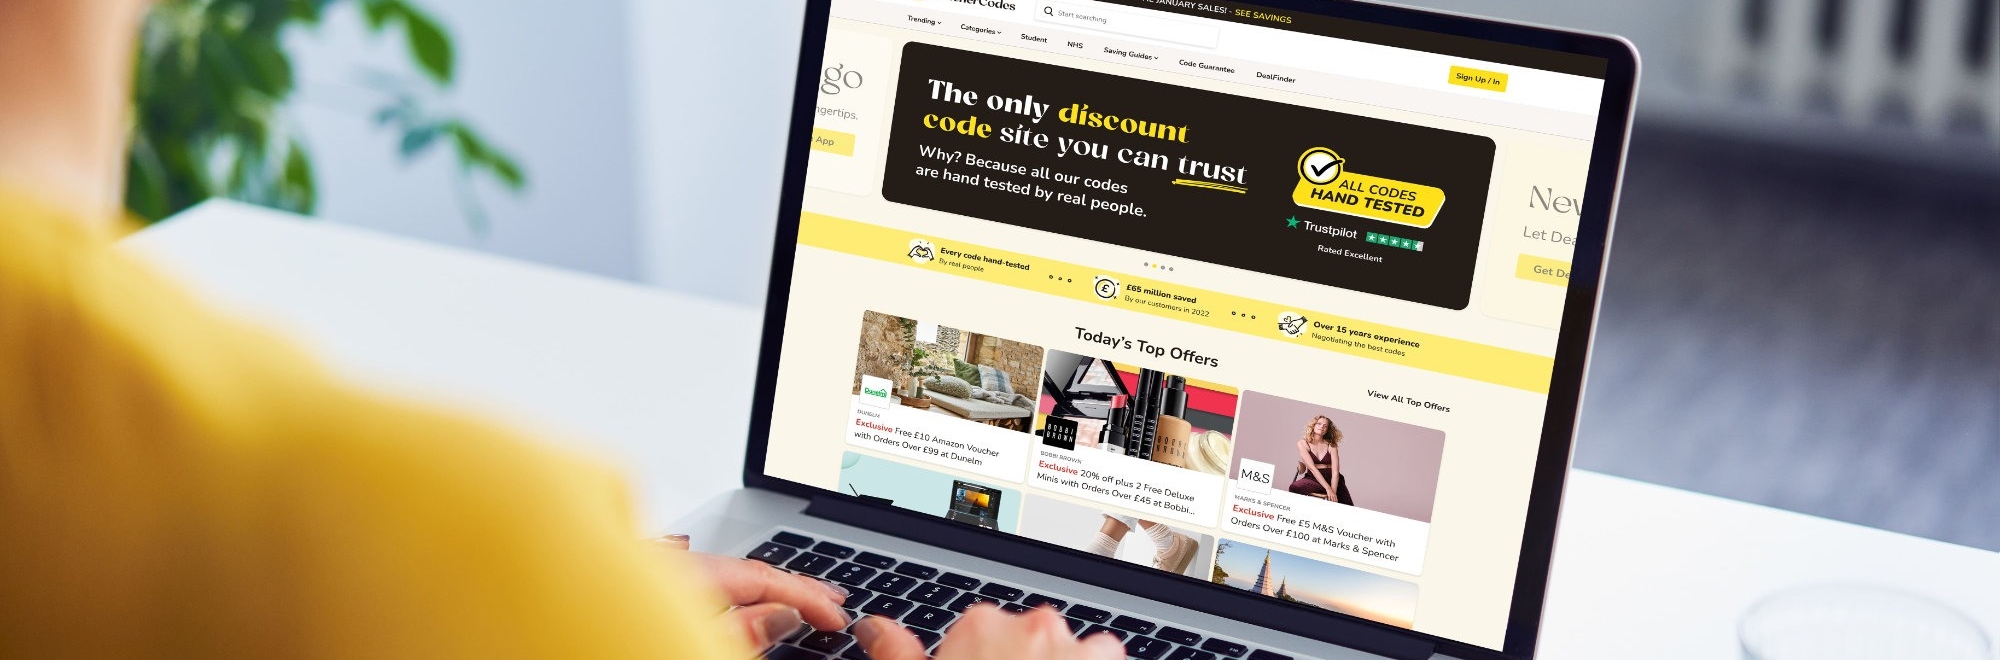 Vouchercodes.co.uk announces rebrand with a more personal touch